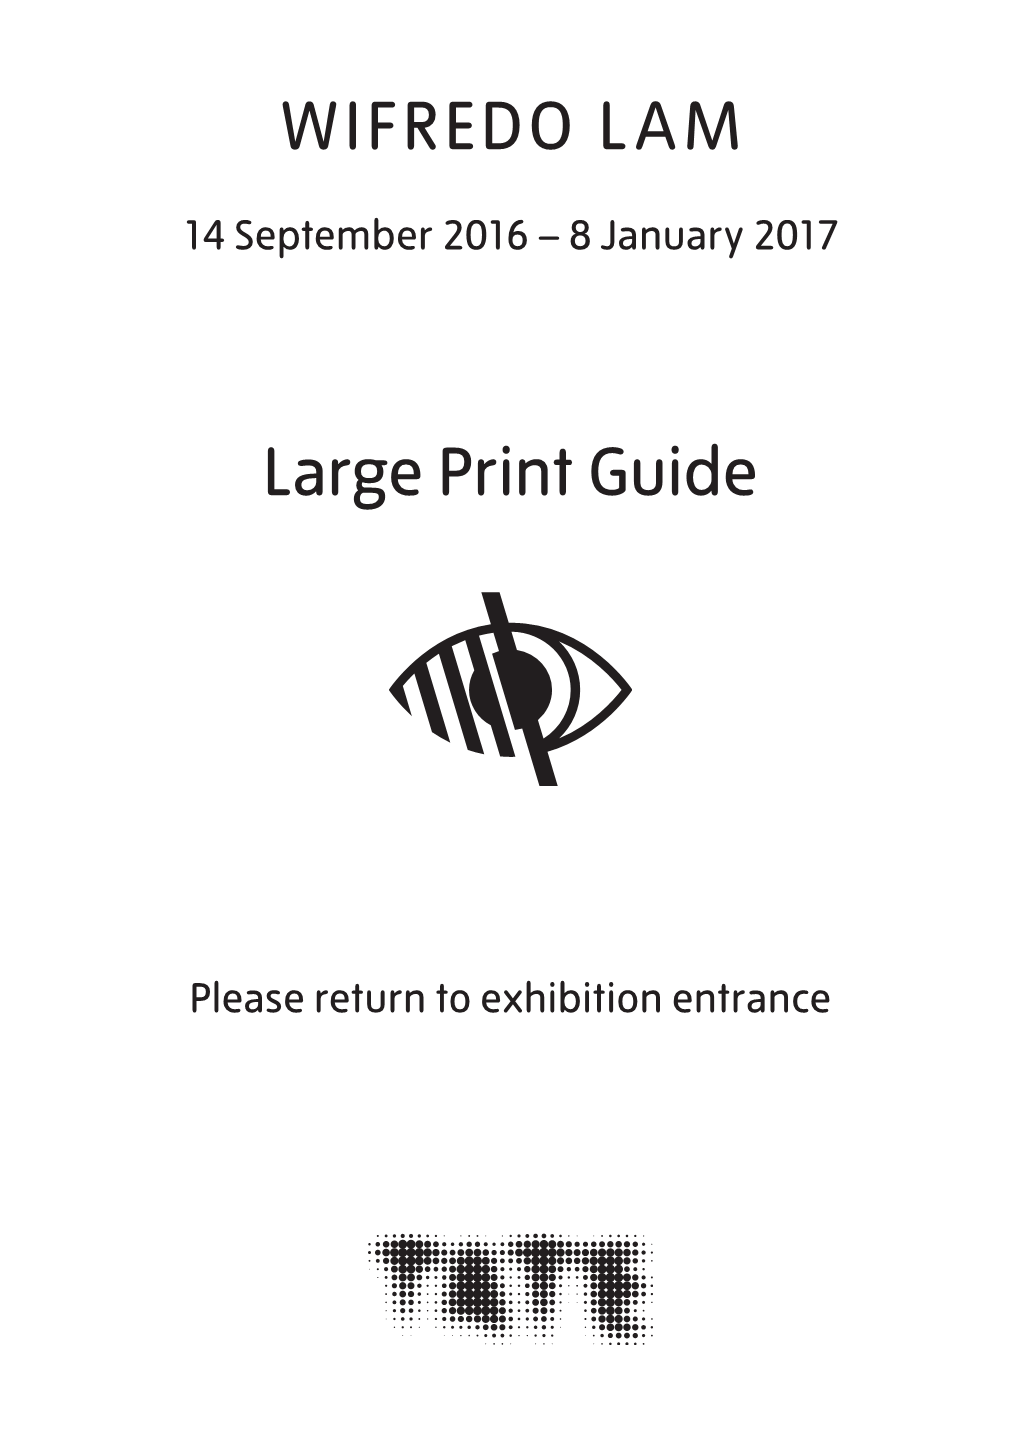 WIFREDO LAM Large Print Guide